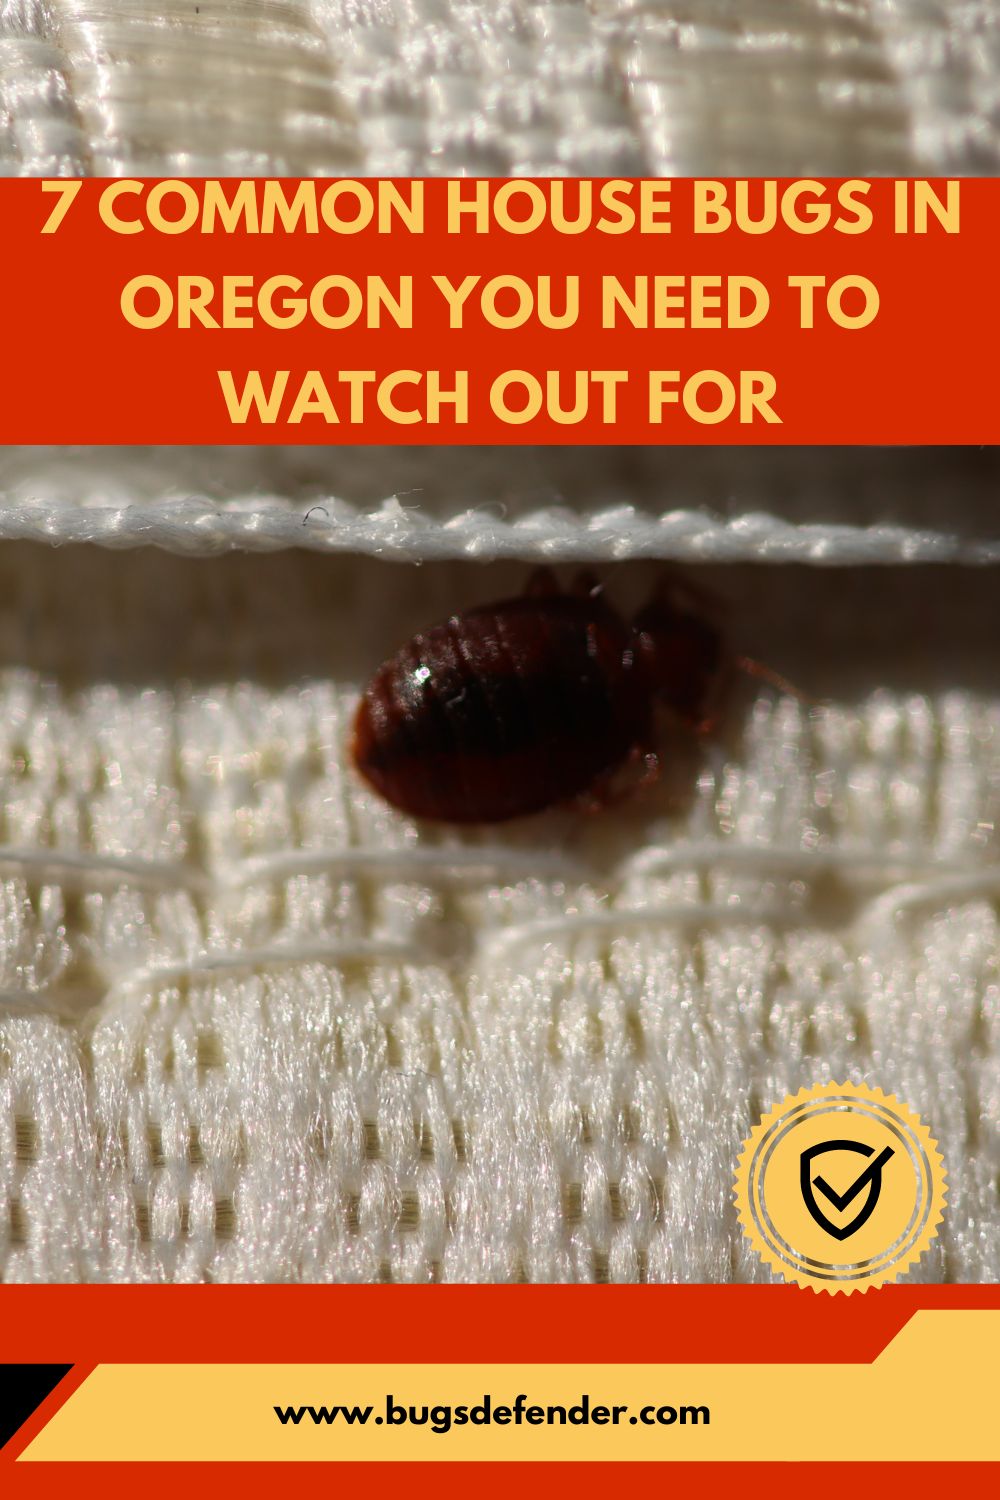 7 Common House Bugs in Oregon You Need To Watch Out For pin 2